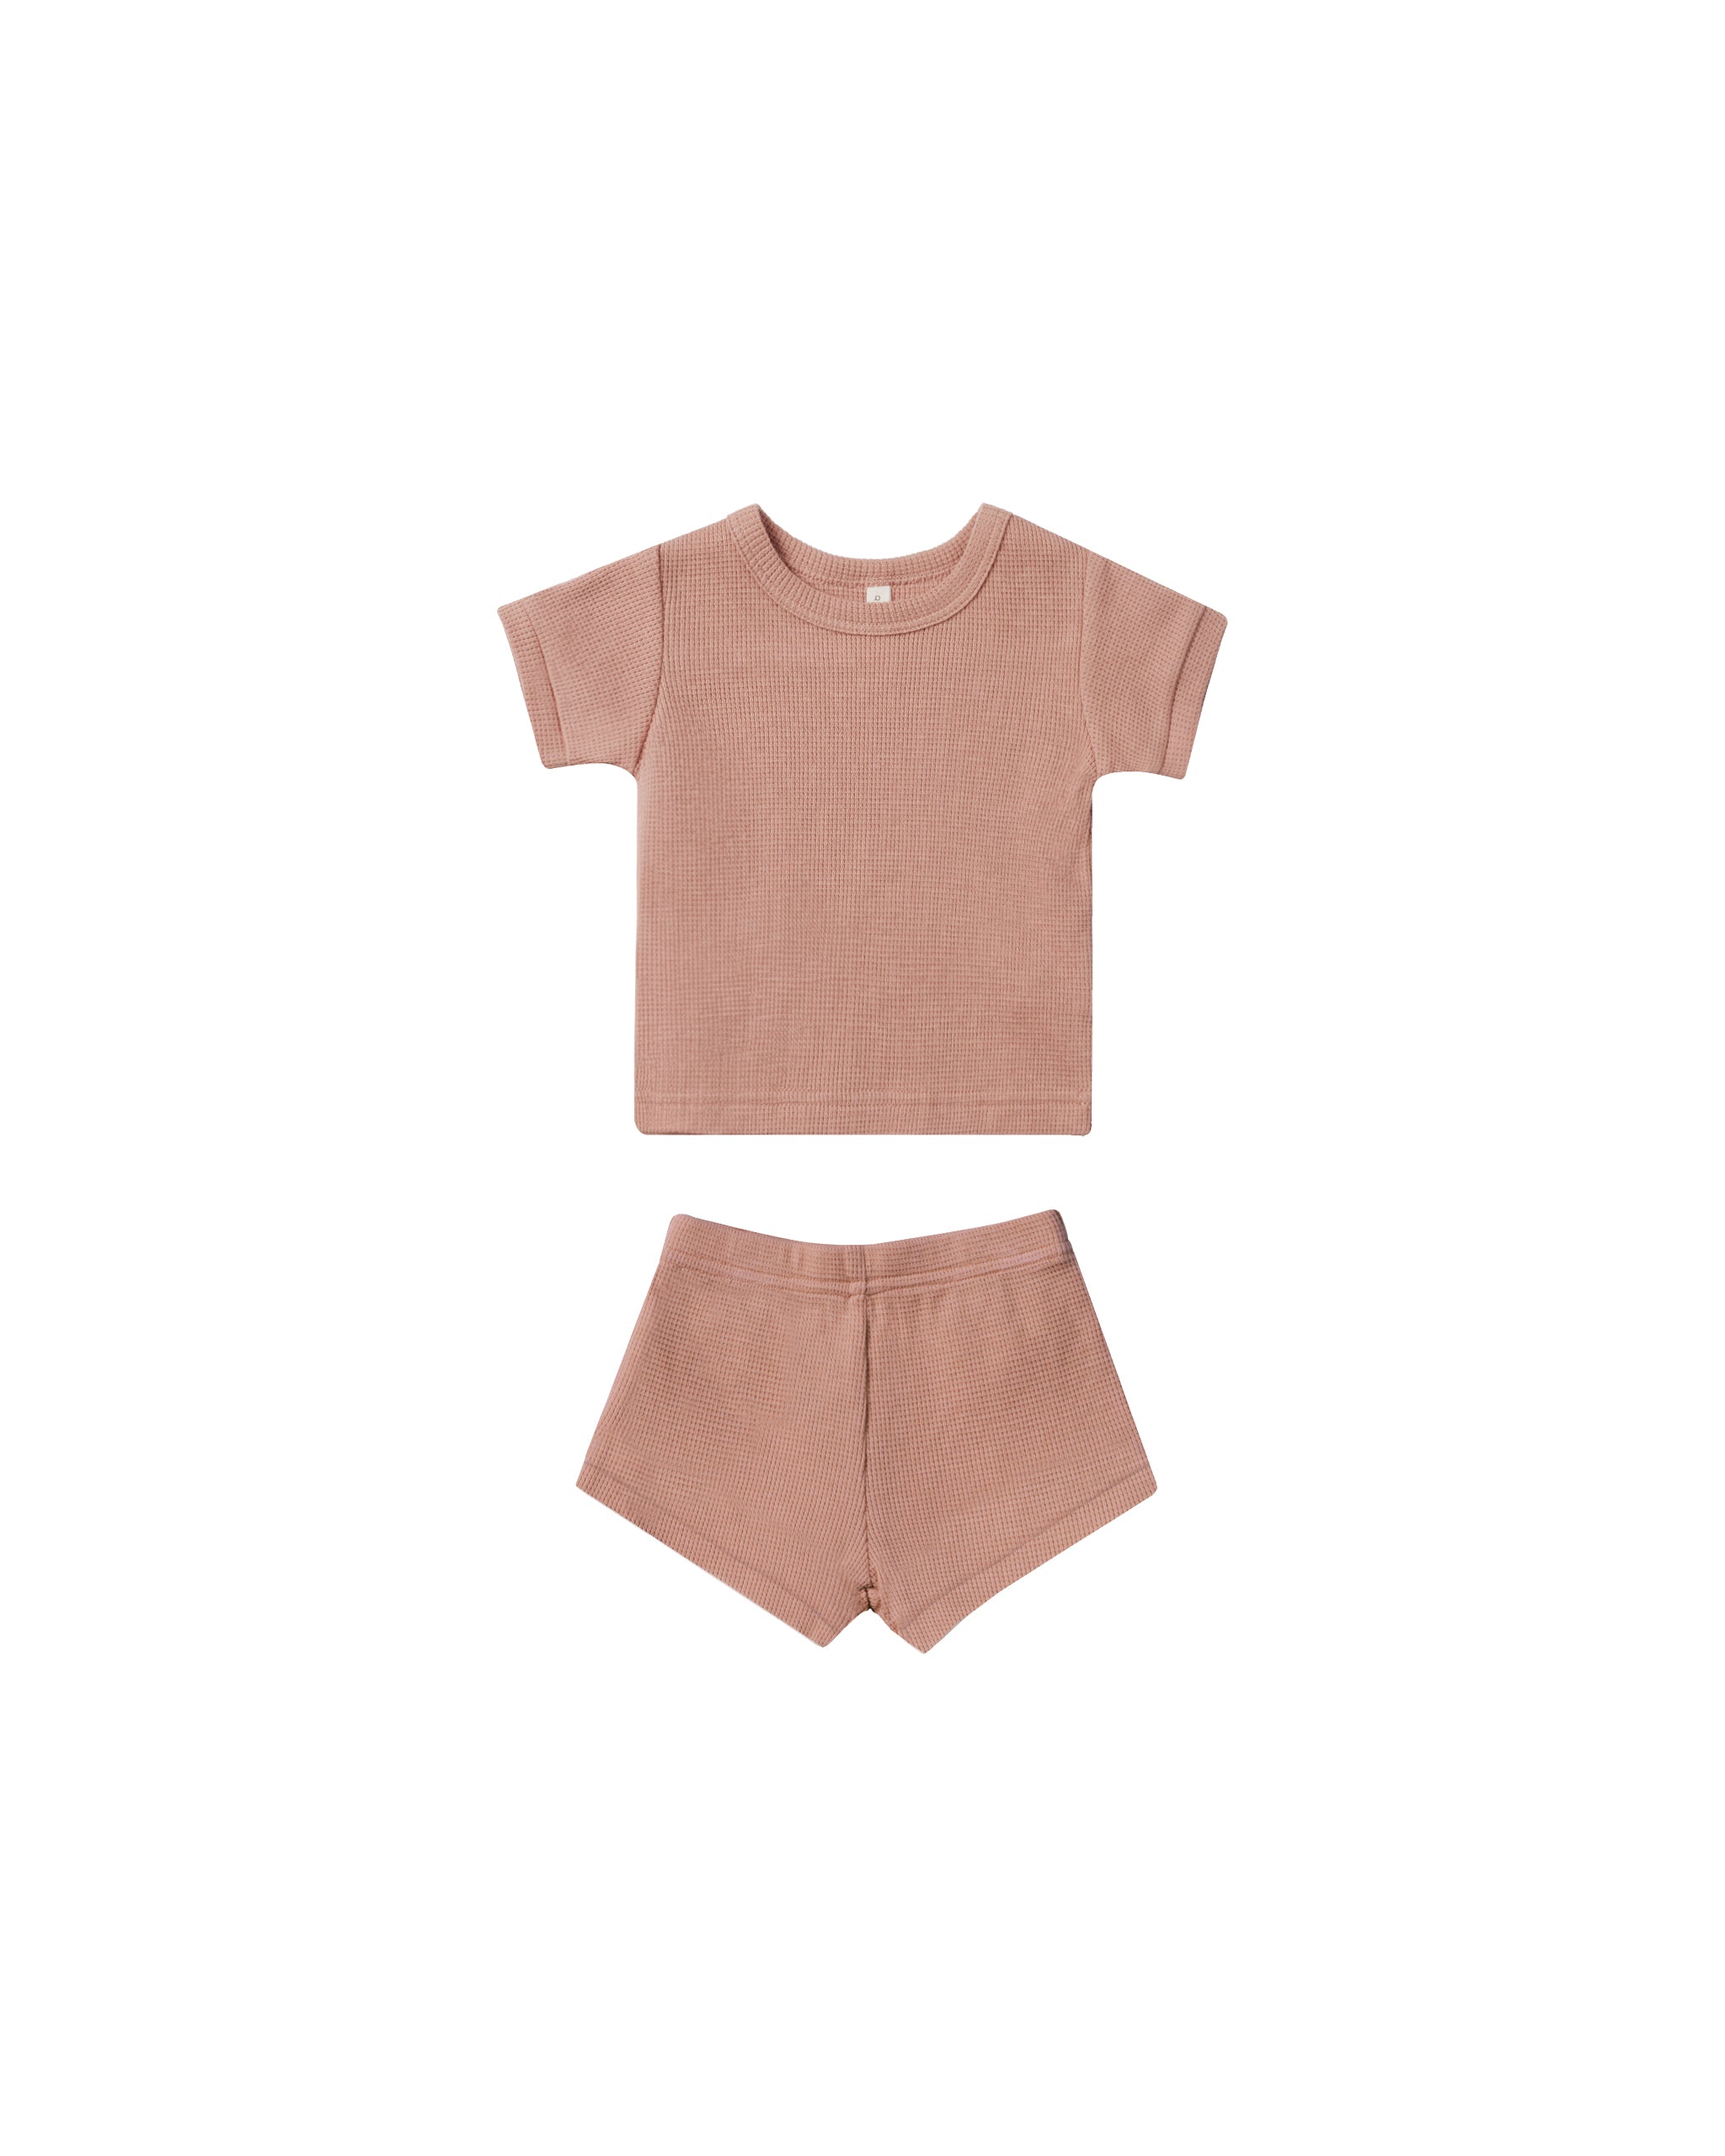 Quincy Mae Waffle Shortie Set - Rose